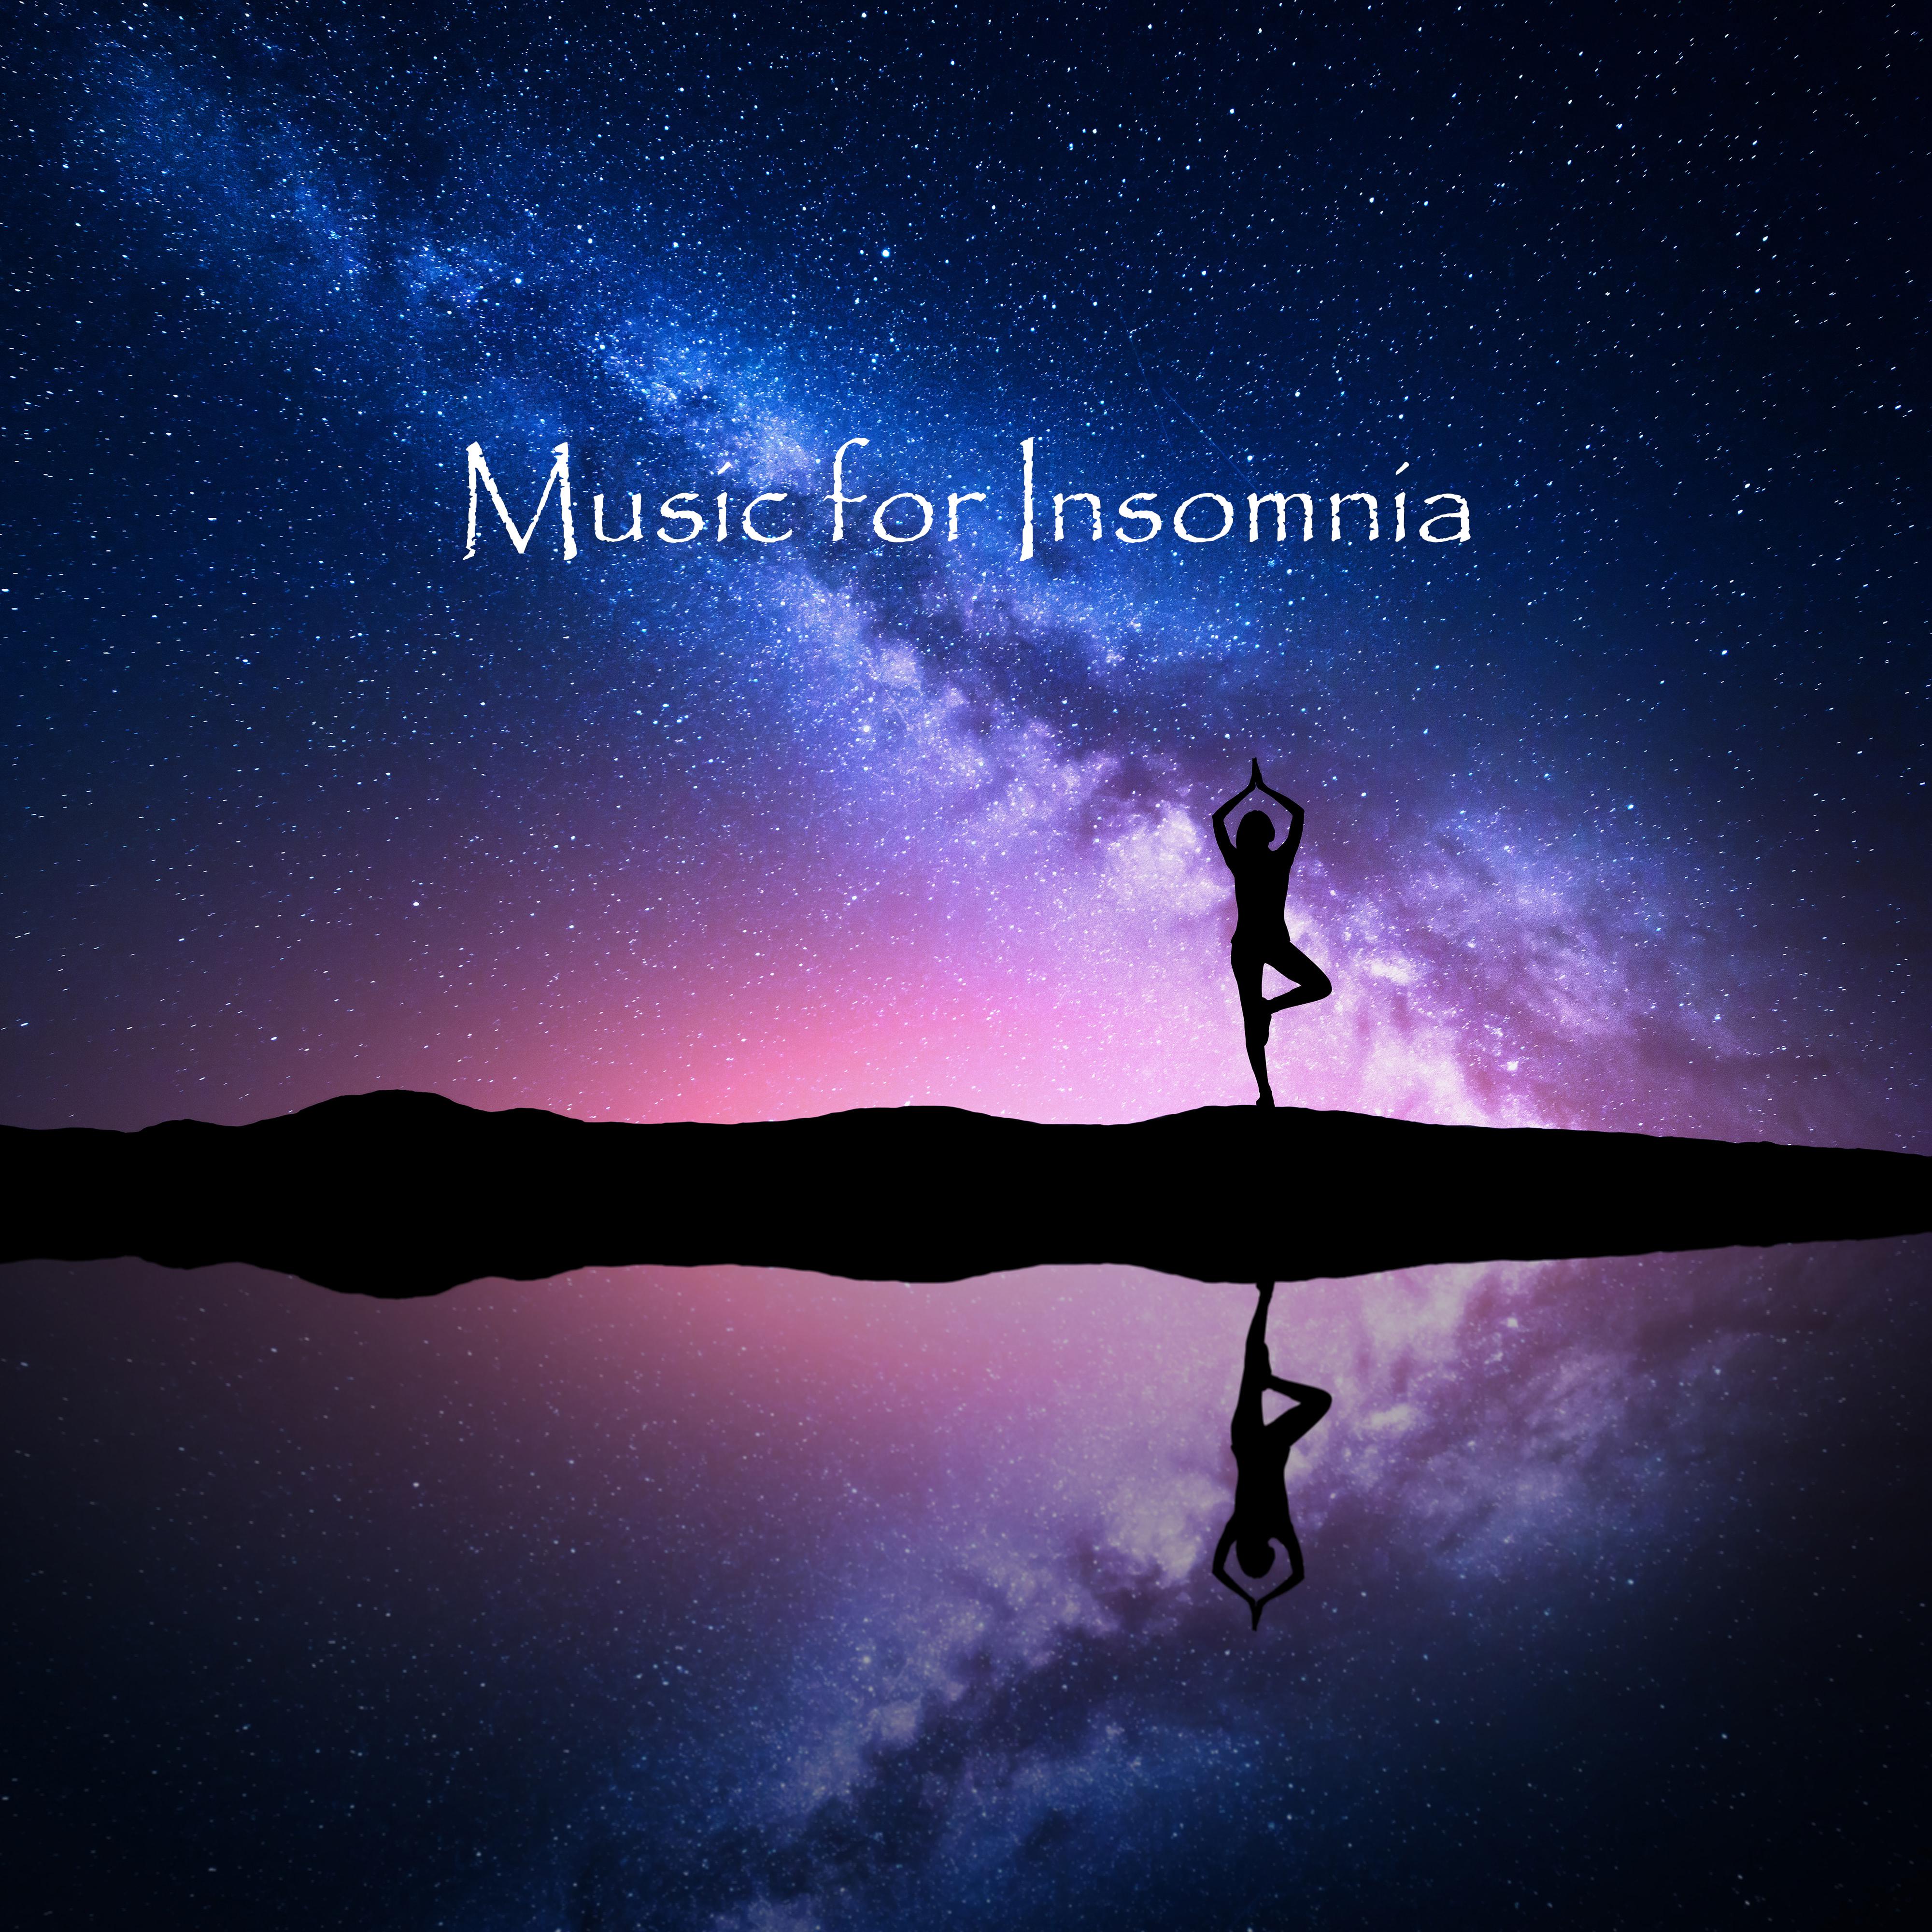 Music for Insomnia: Best Ambient Music to Help You Fall Asleep